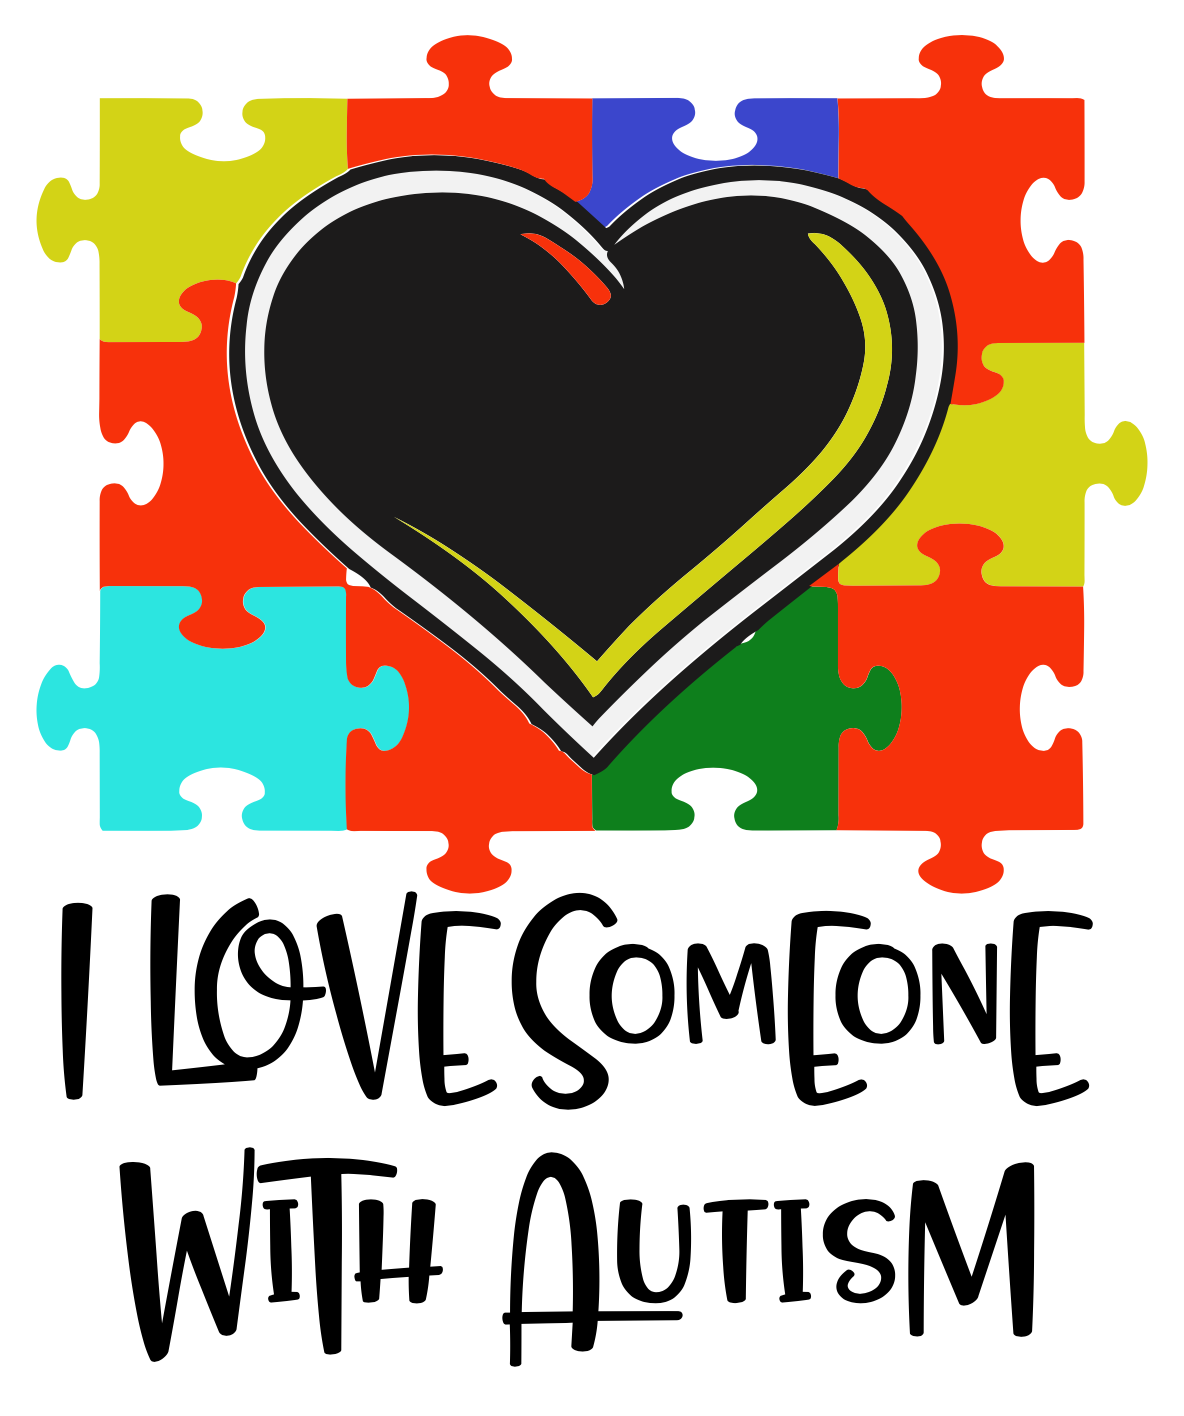 I love someone with autism